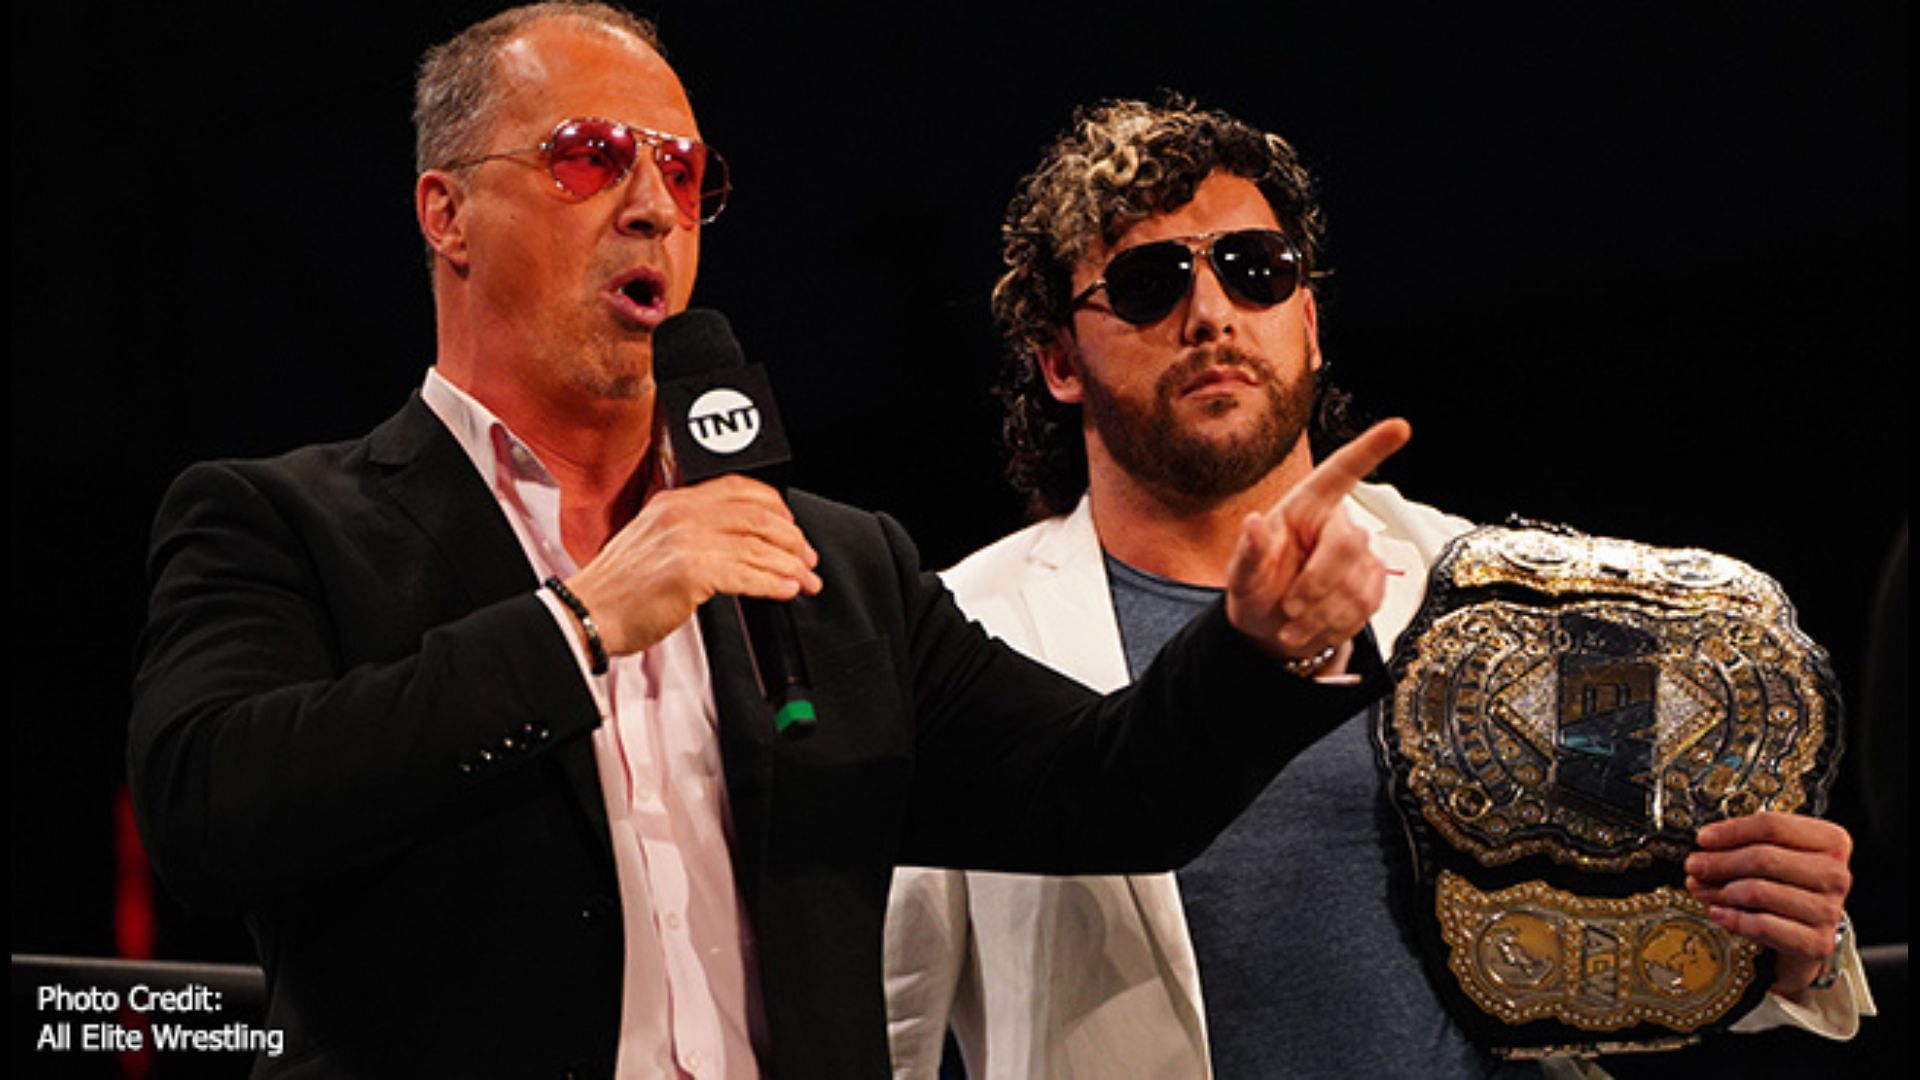 Kenny Omega and Don Callis are both signed to AEW